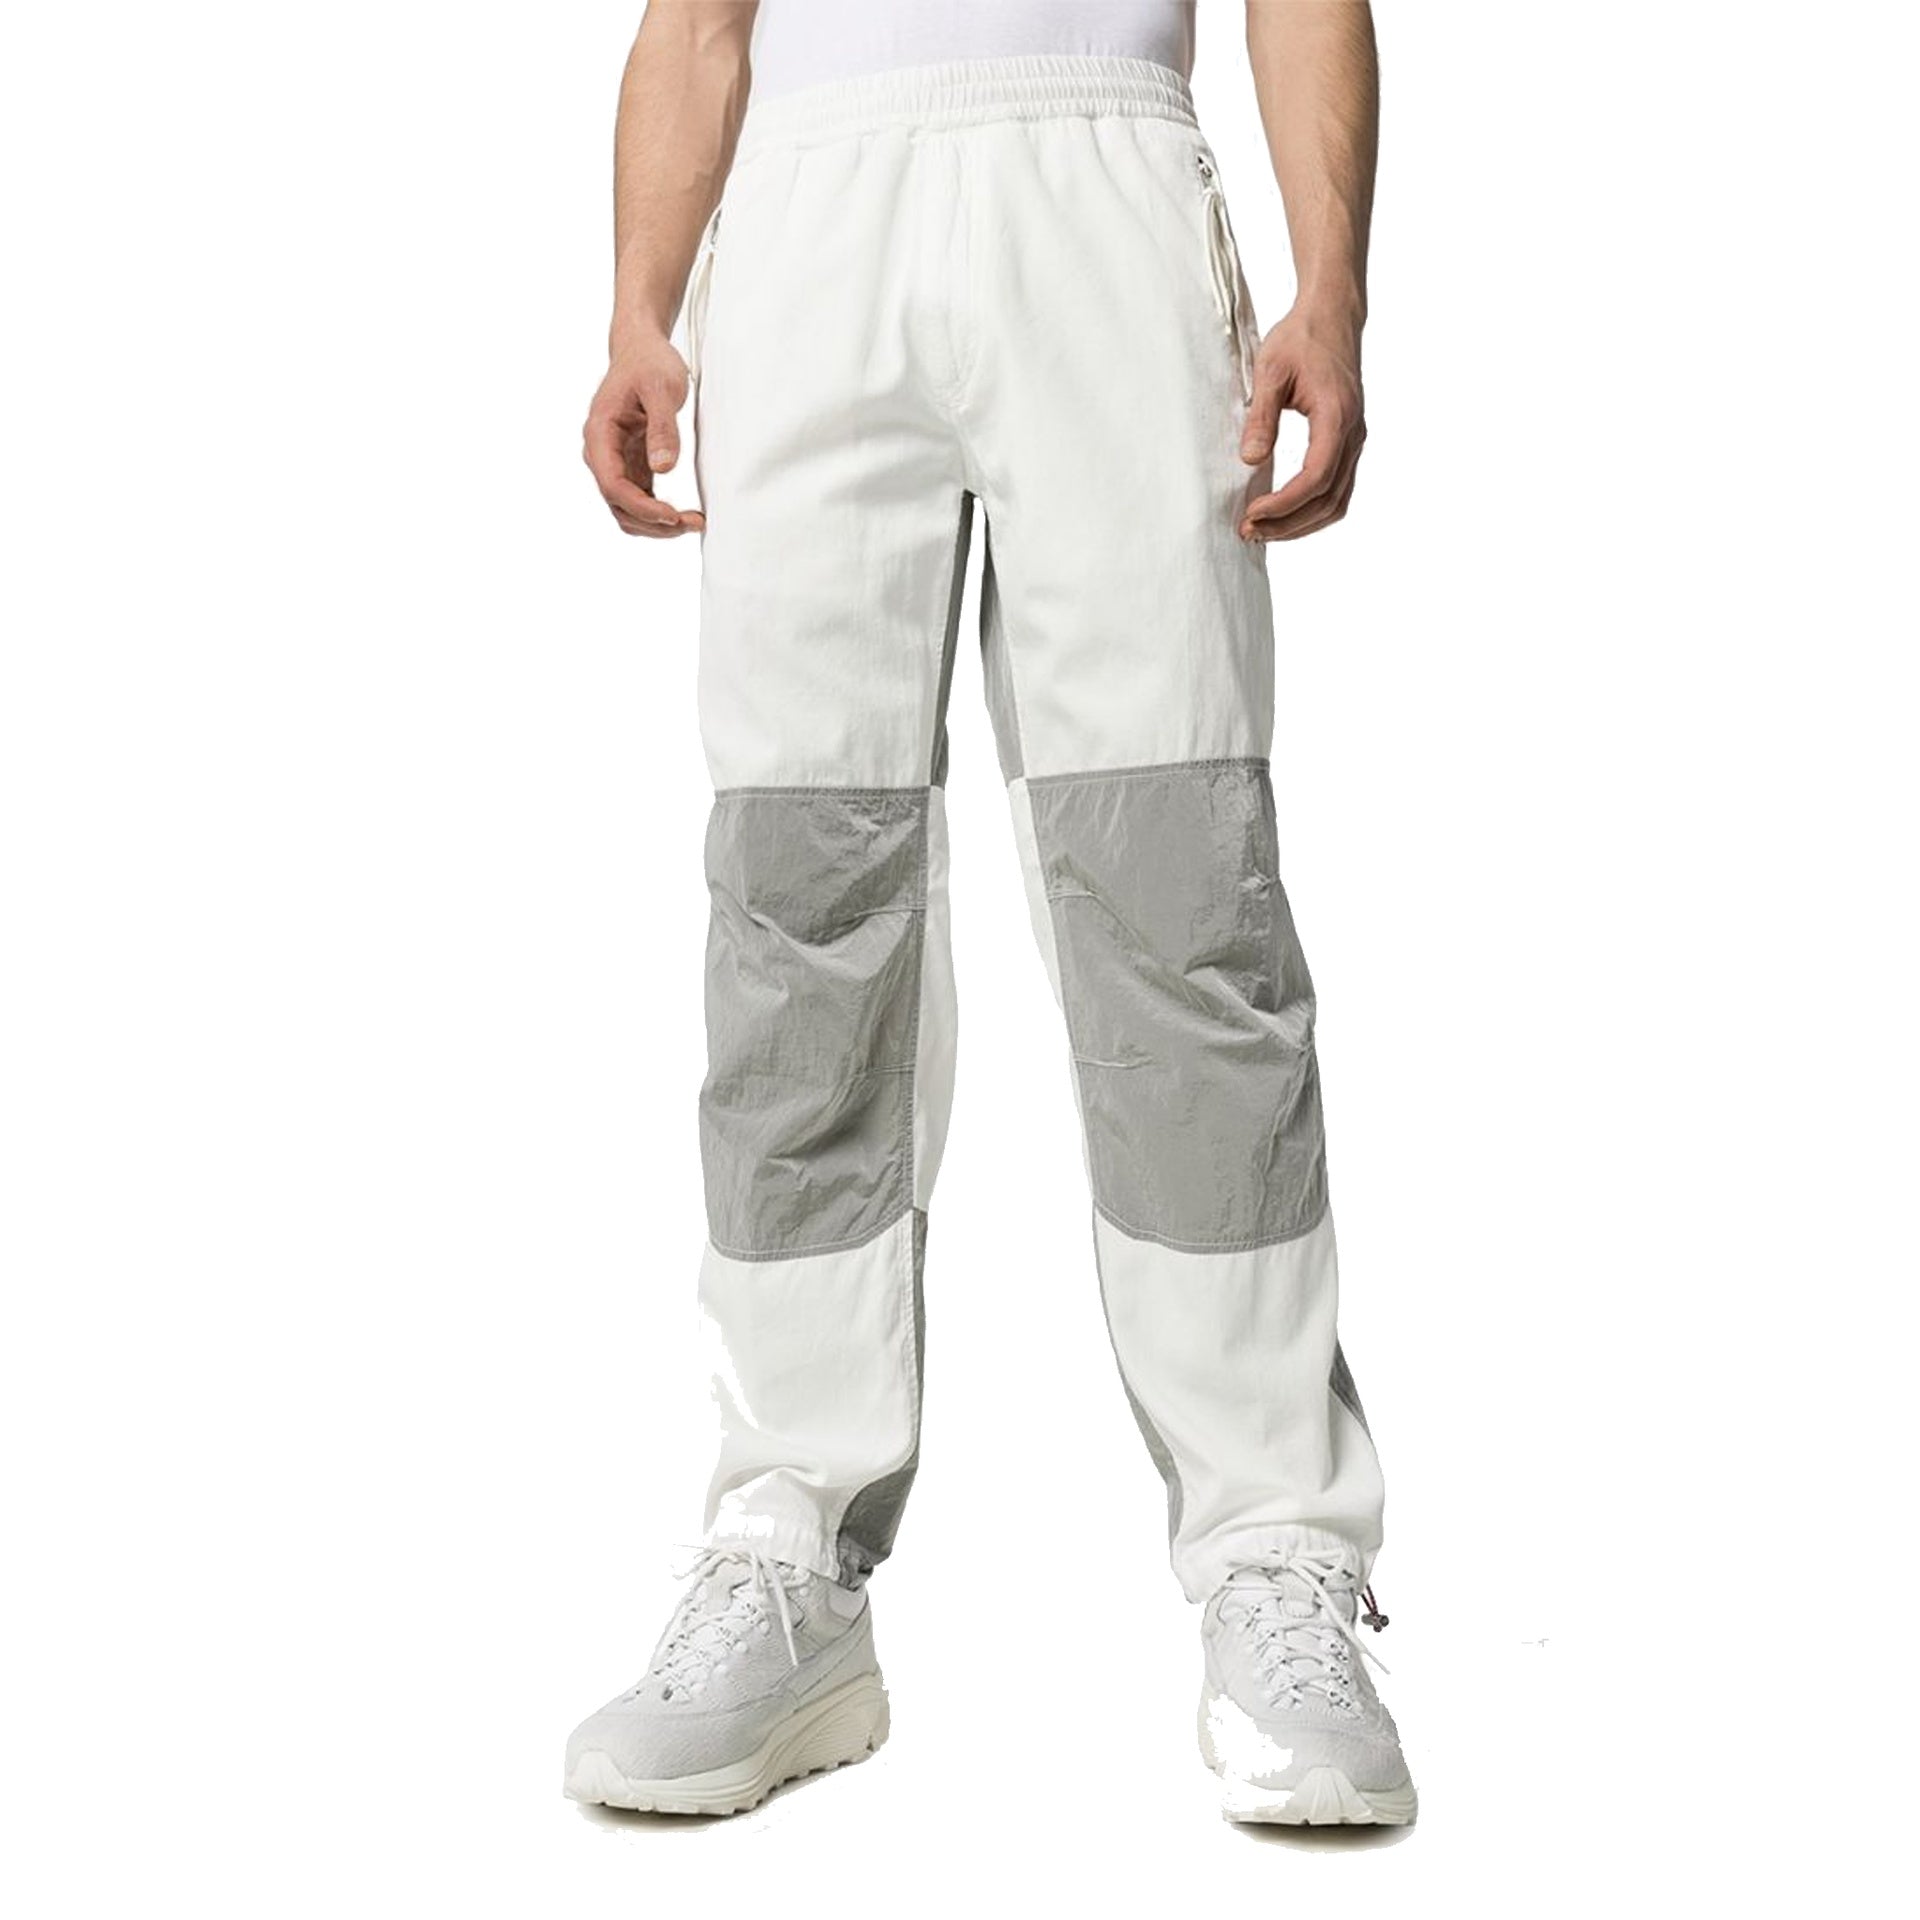 MONCLER-OUTLET-SALE-Moncler-1952-Two-Tone-Track-Pants-Hosen-WHITE-48-ARCHIVE-COLLECTION-2.jpg